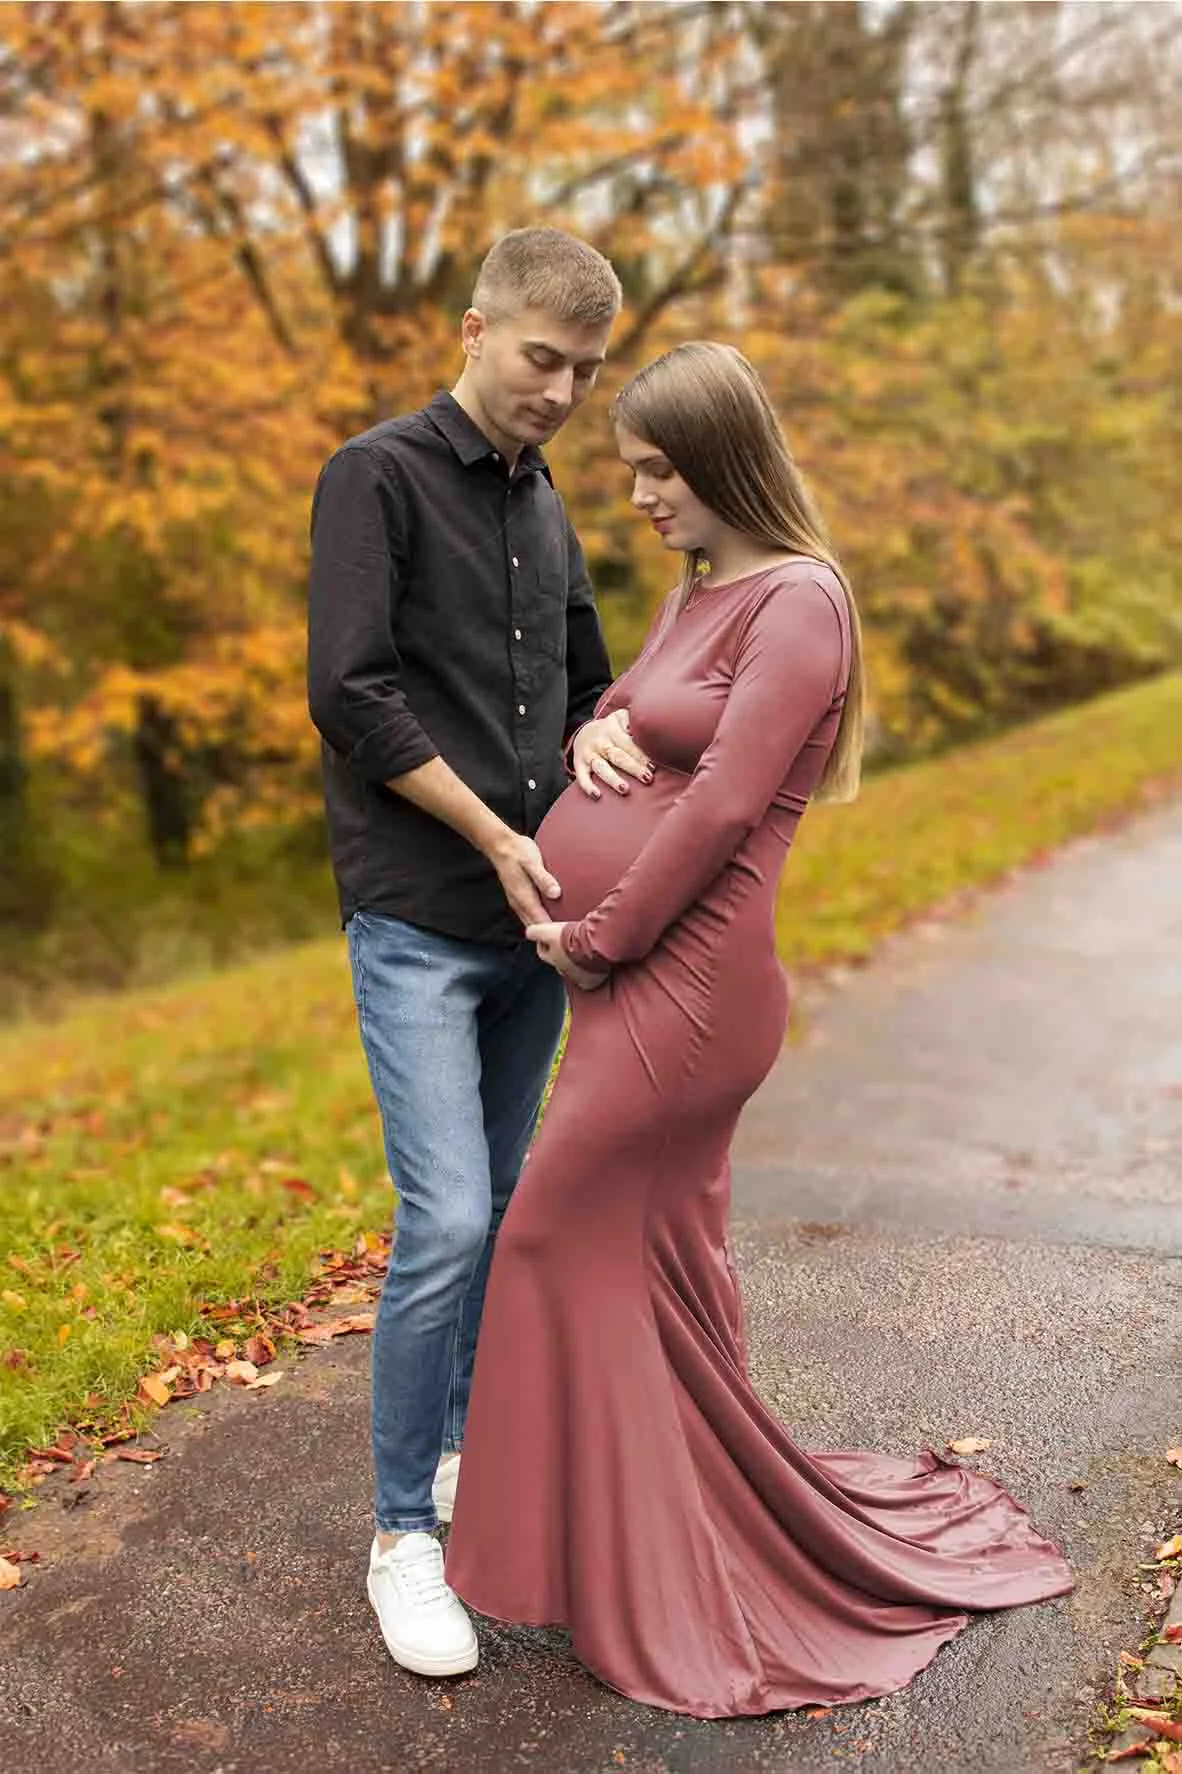 Maternity photoshoot outdoor with couple in Milton Keynes